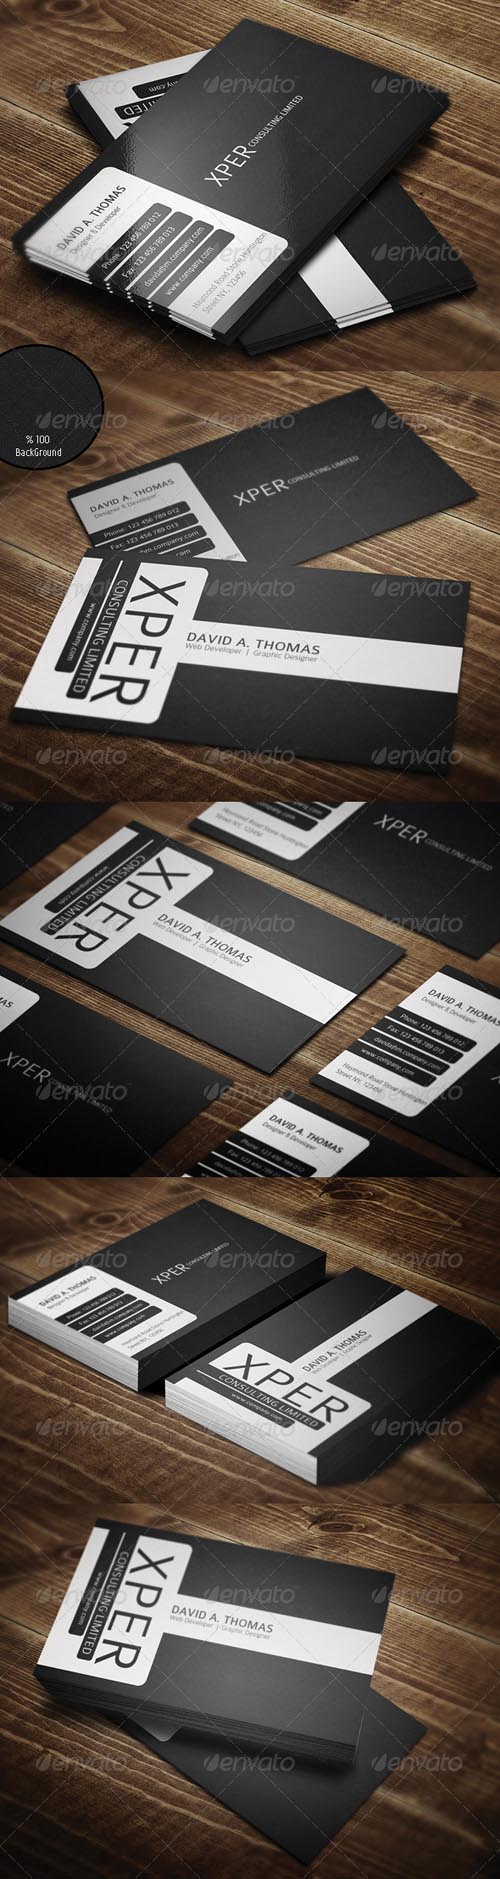 GraphicRiver - Personal Business Card